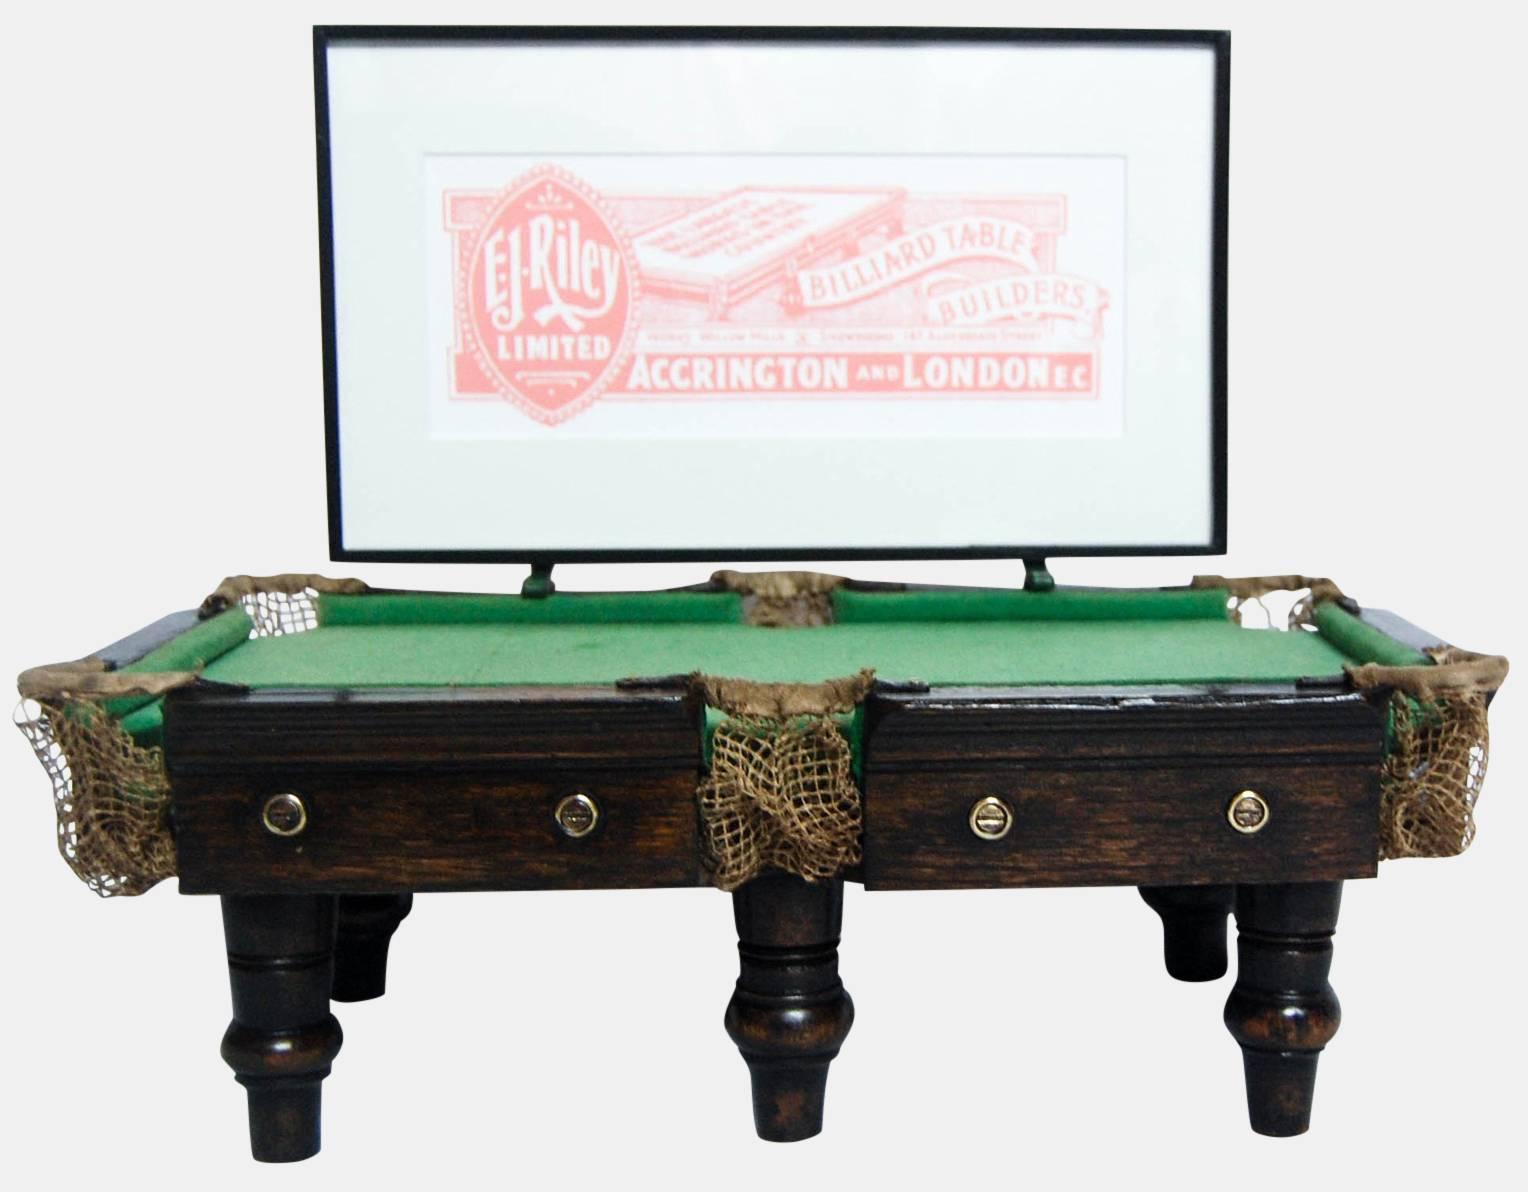 A rare miniature billiards table shop advertising display for E.J. Riley.

c 1920.